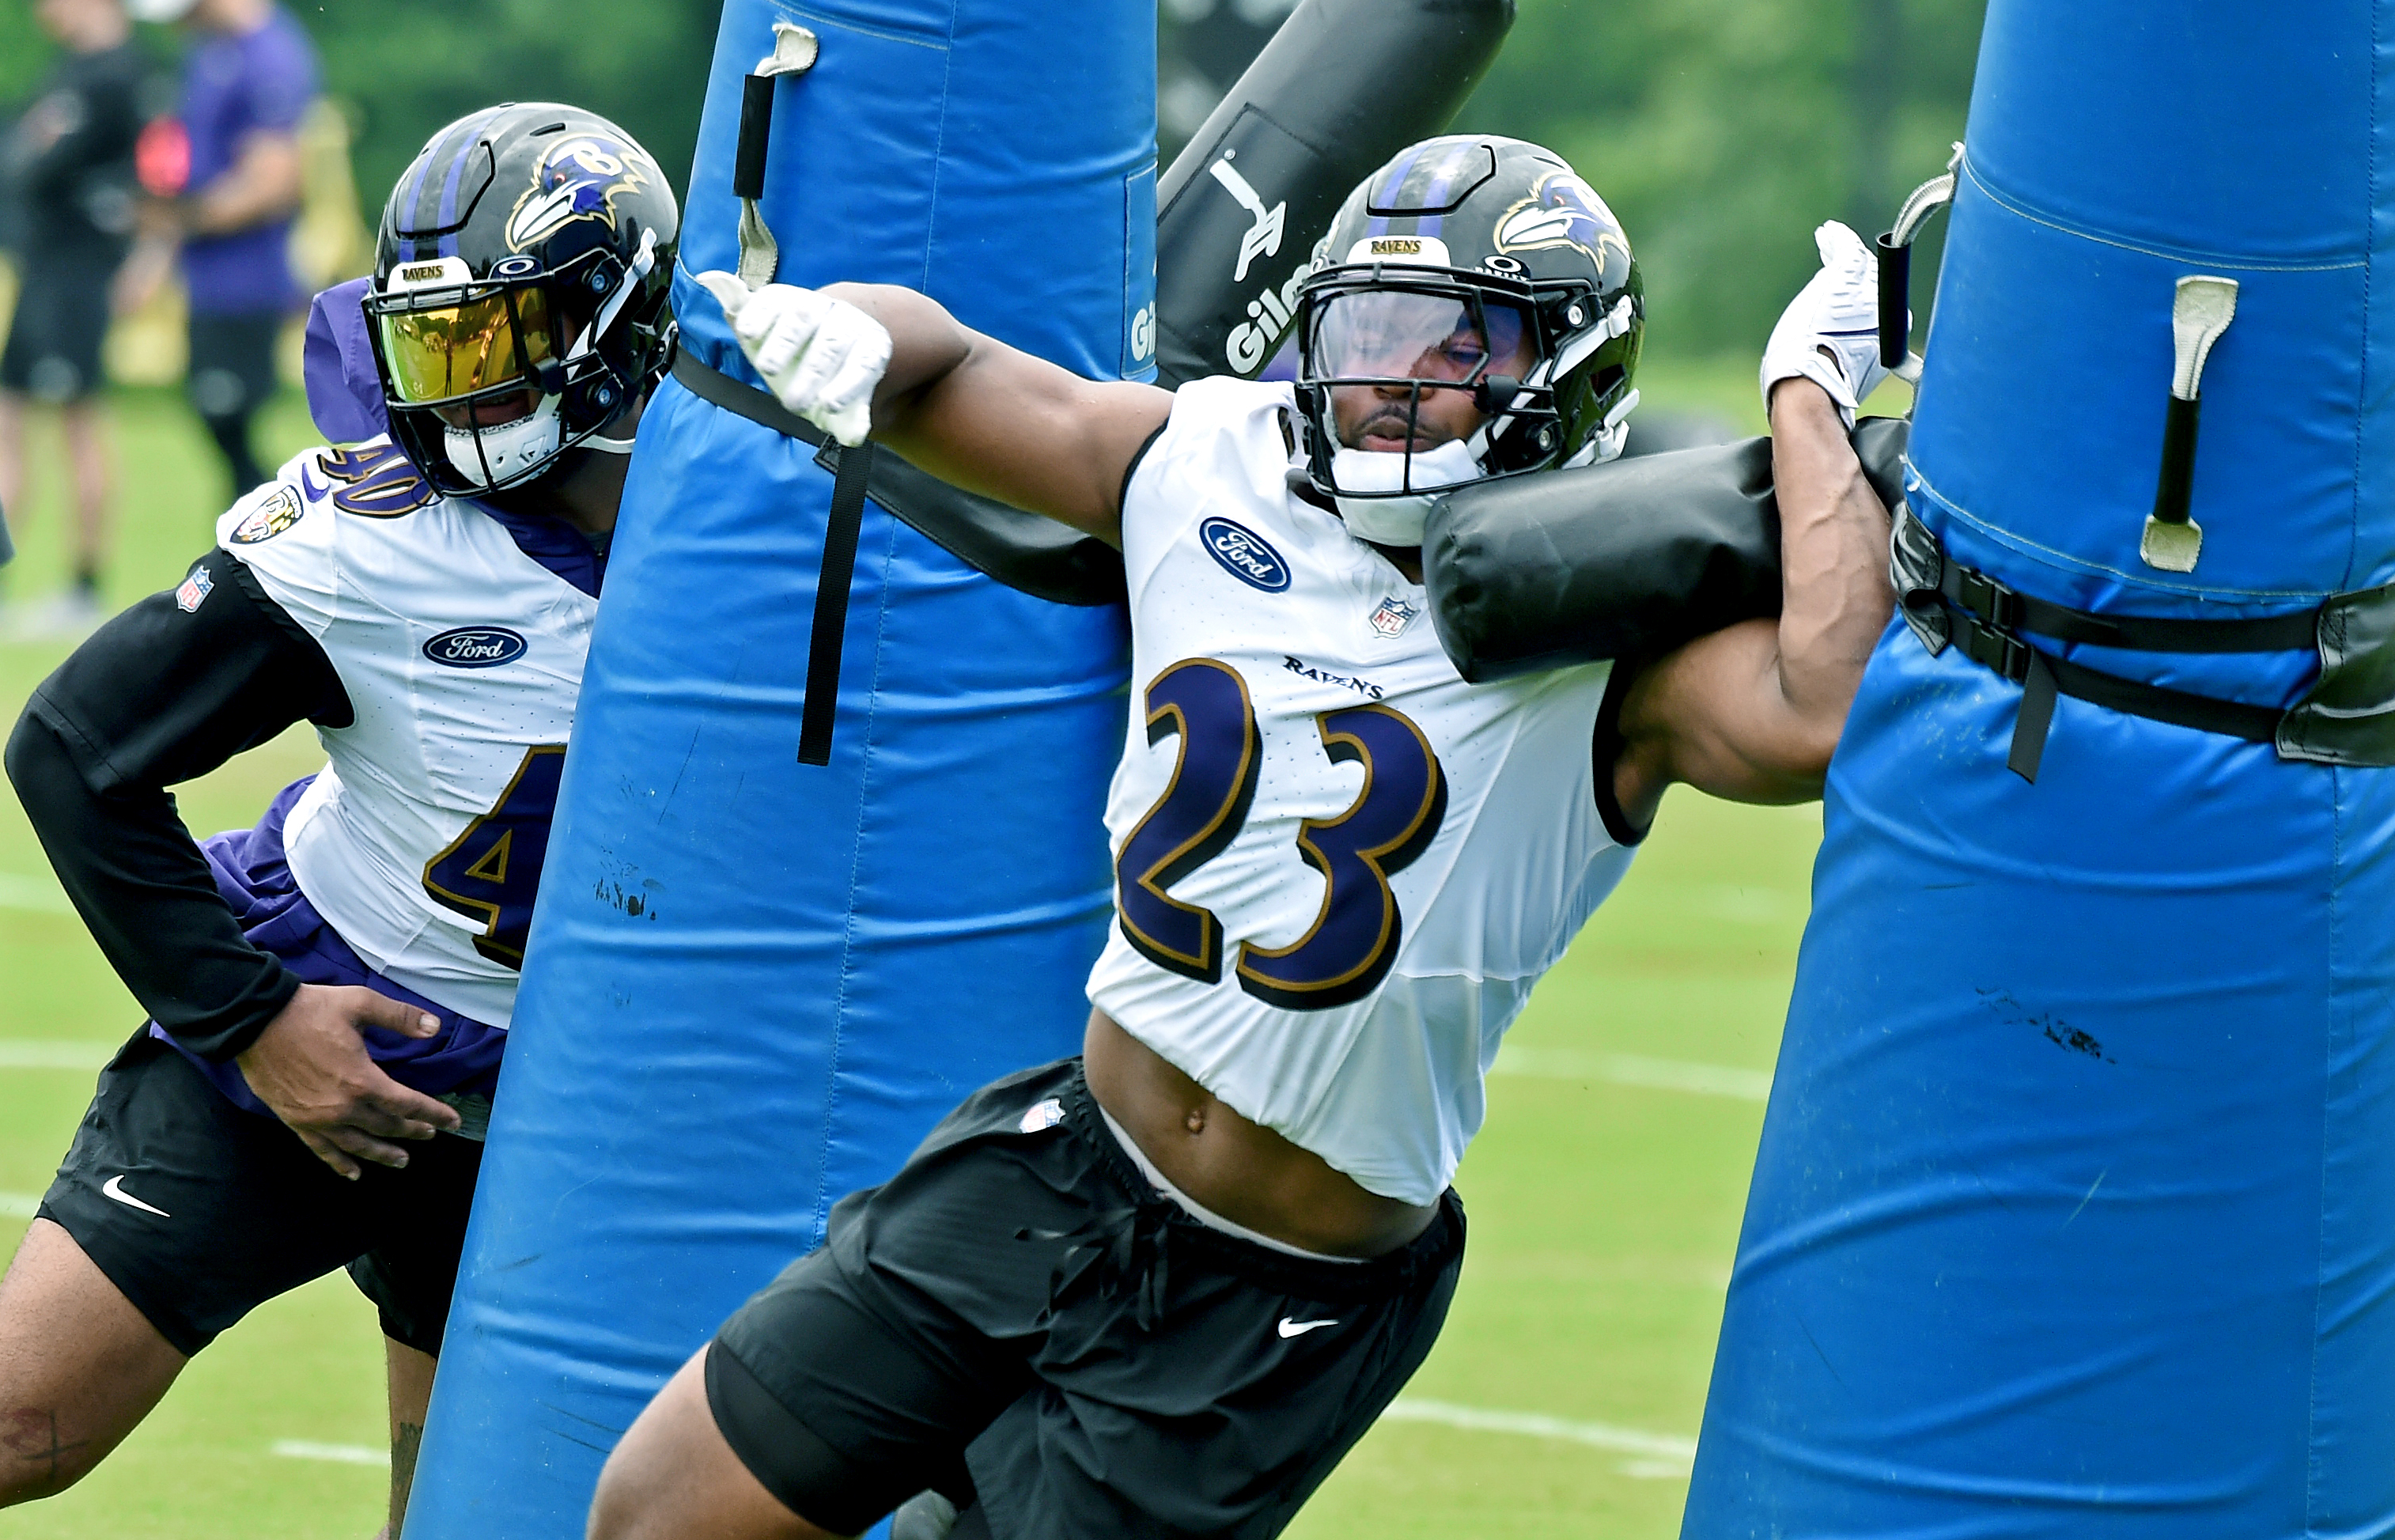 From left, Baltimore Ravens linebacker Malik Harrison and inside linebacker Trenton Simpson drill during OTAs open practice session on Thursday at the Under Armour Performance Center. (Kim Hairston/Staff)